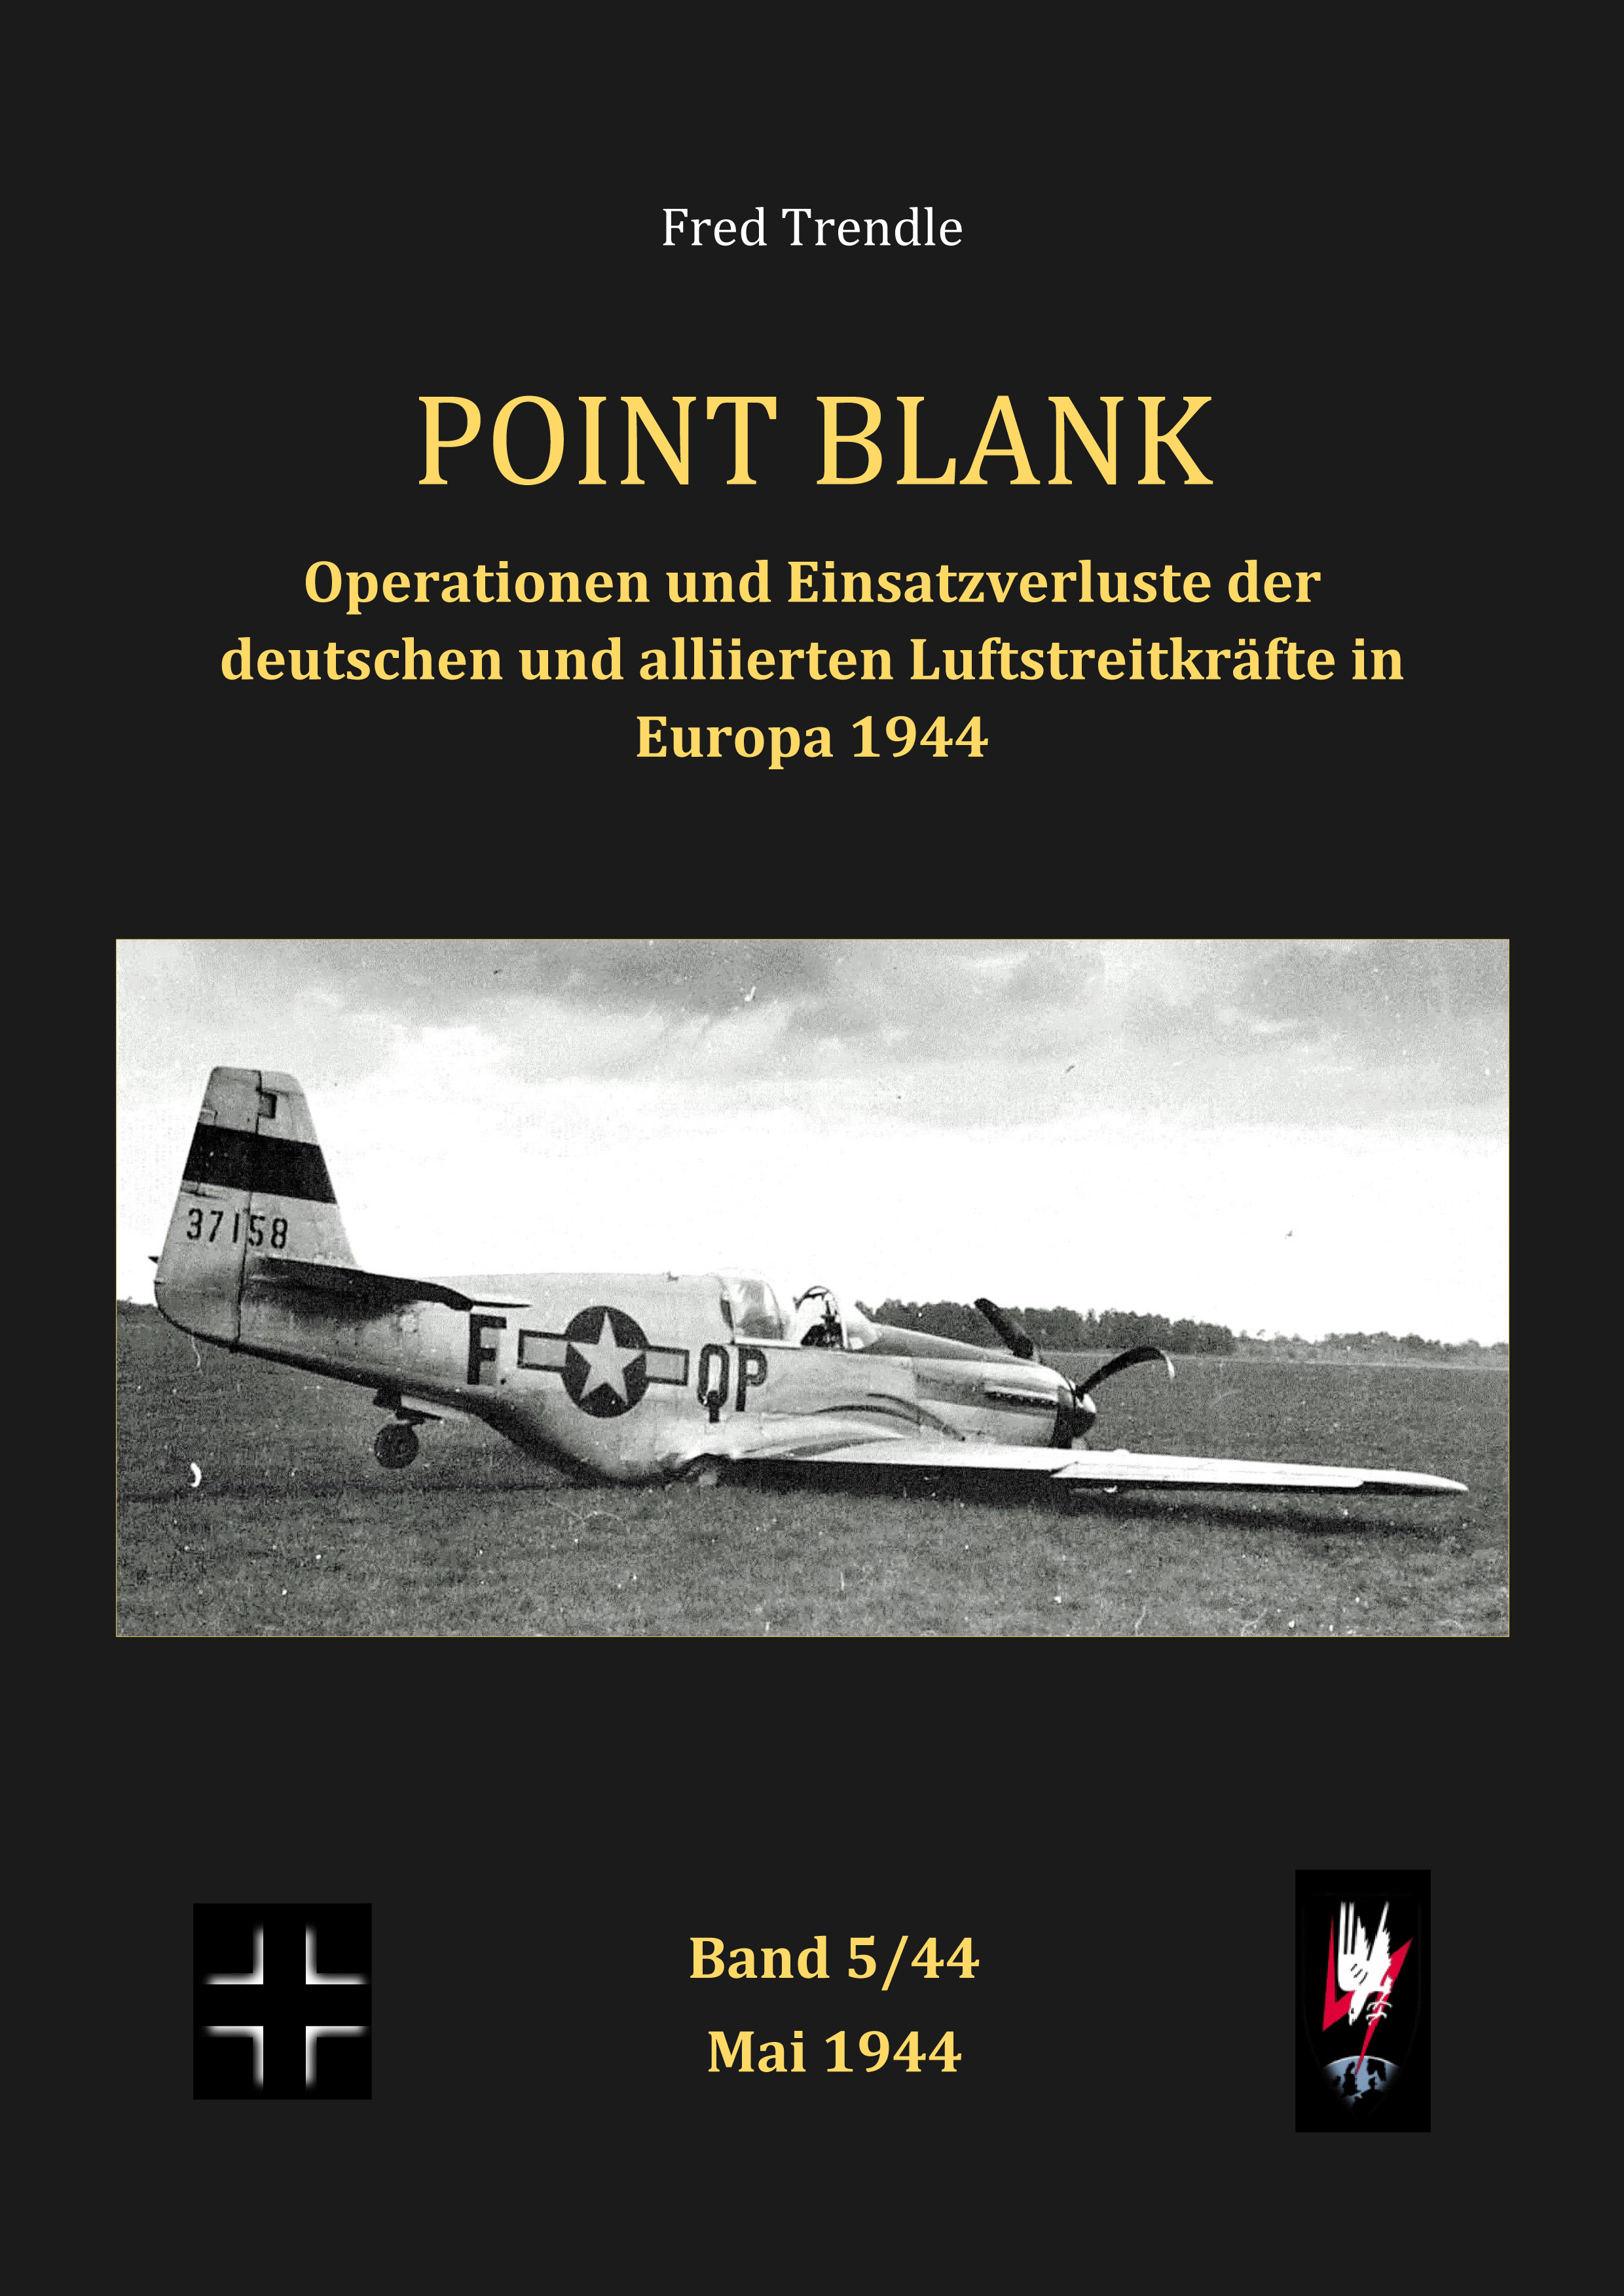 Fred Trendle-Point Blank Band 5 Mai 1944